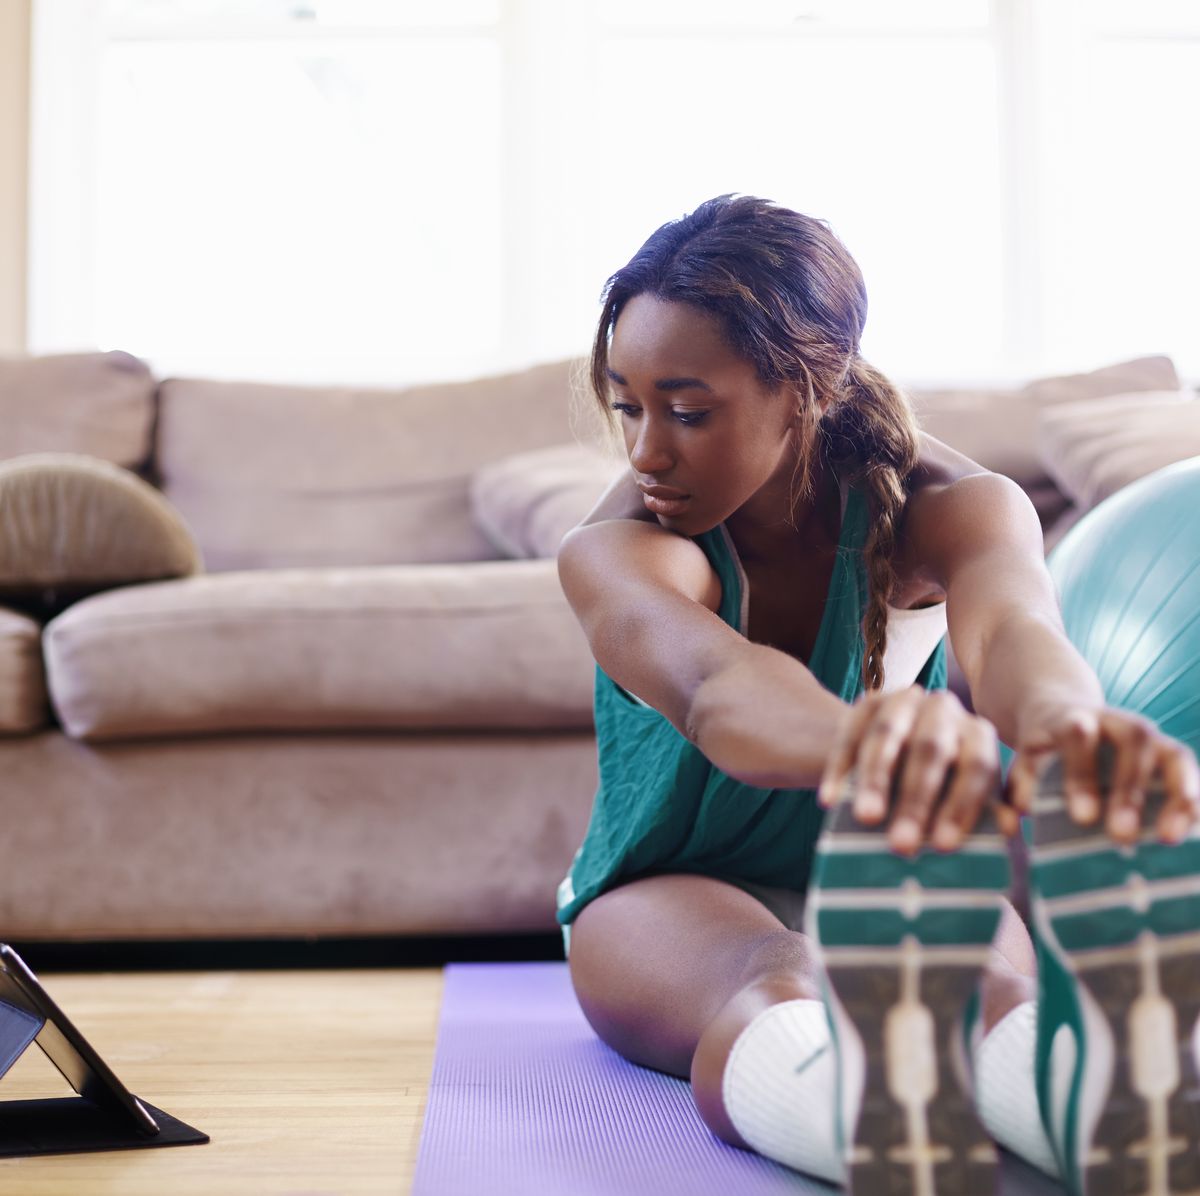 12 Free Online Yoga and Fitness Classes You Can Do at Home Alone During the  COVID-19 Outbreak, by Jennifer Garam